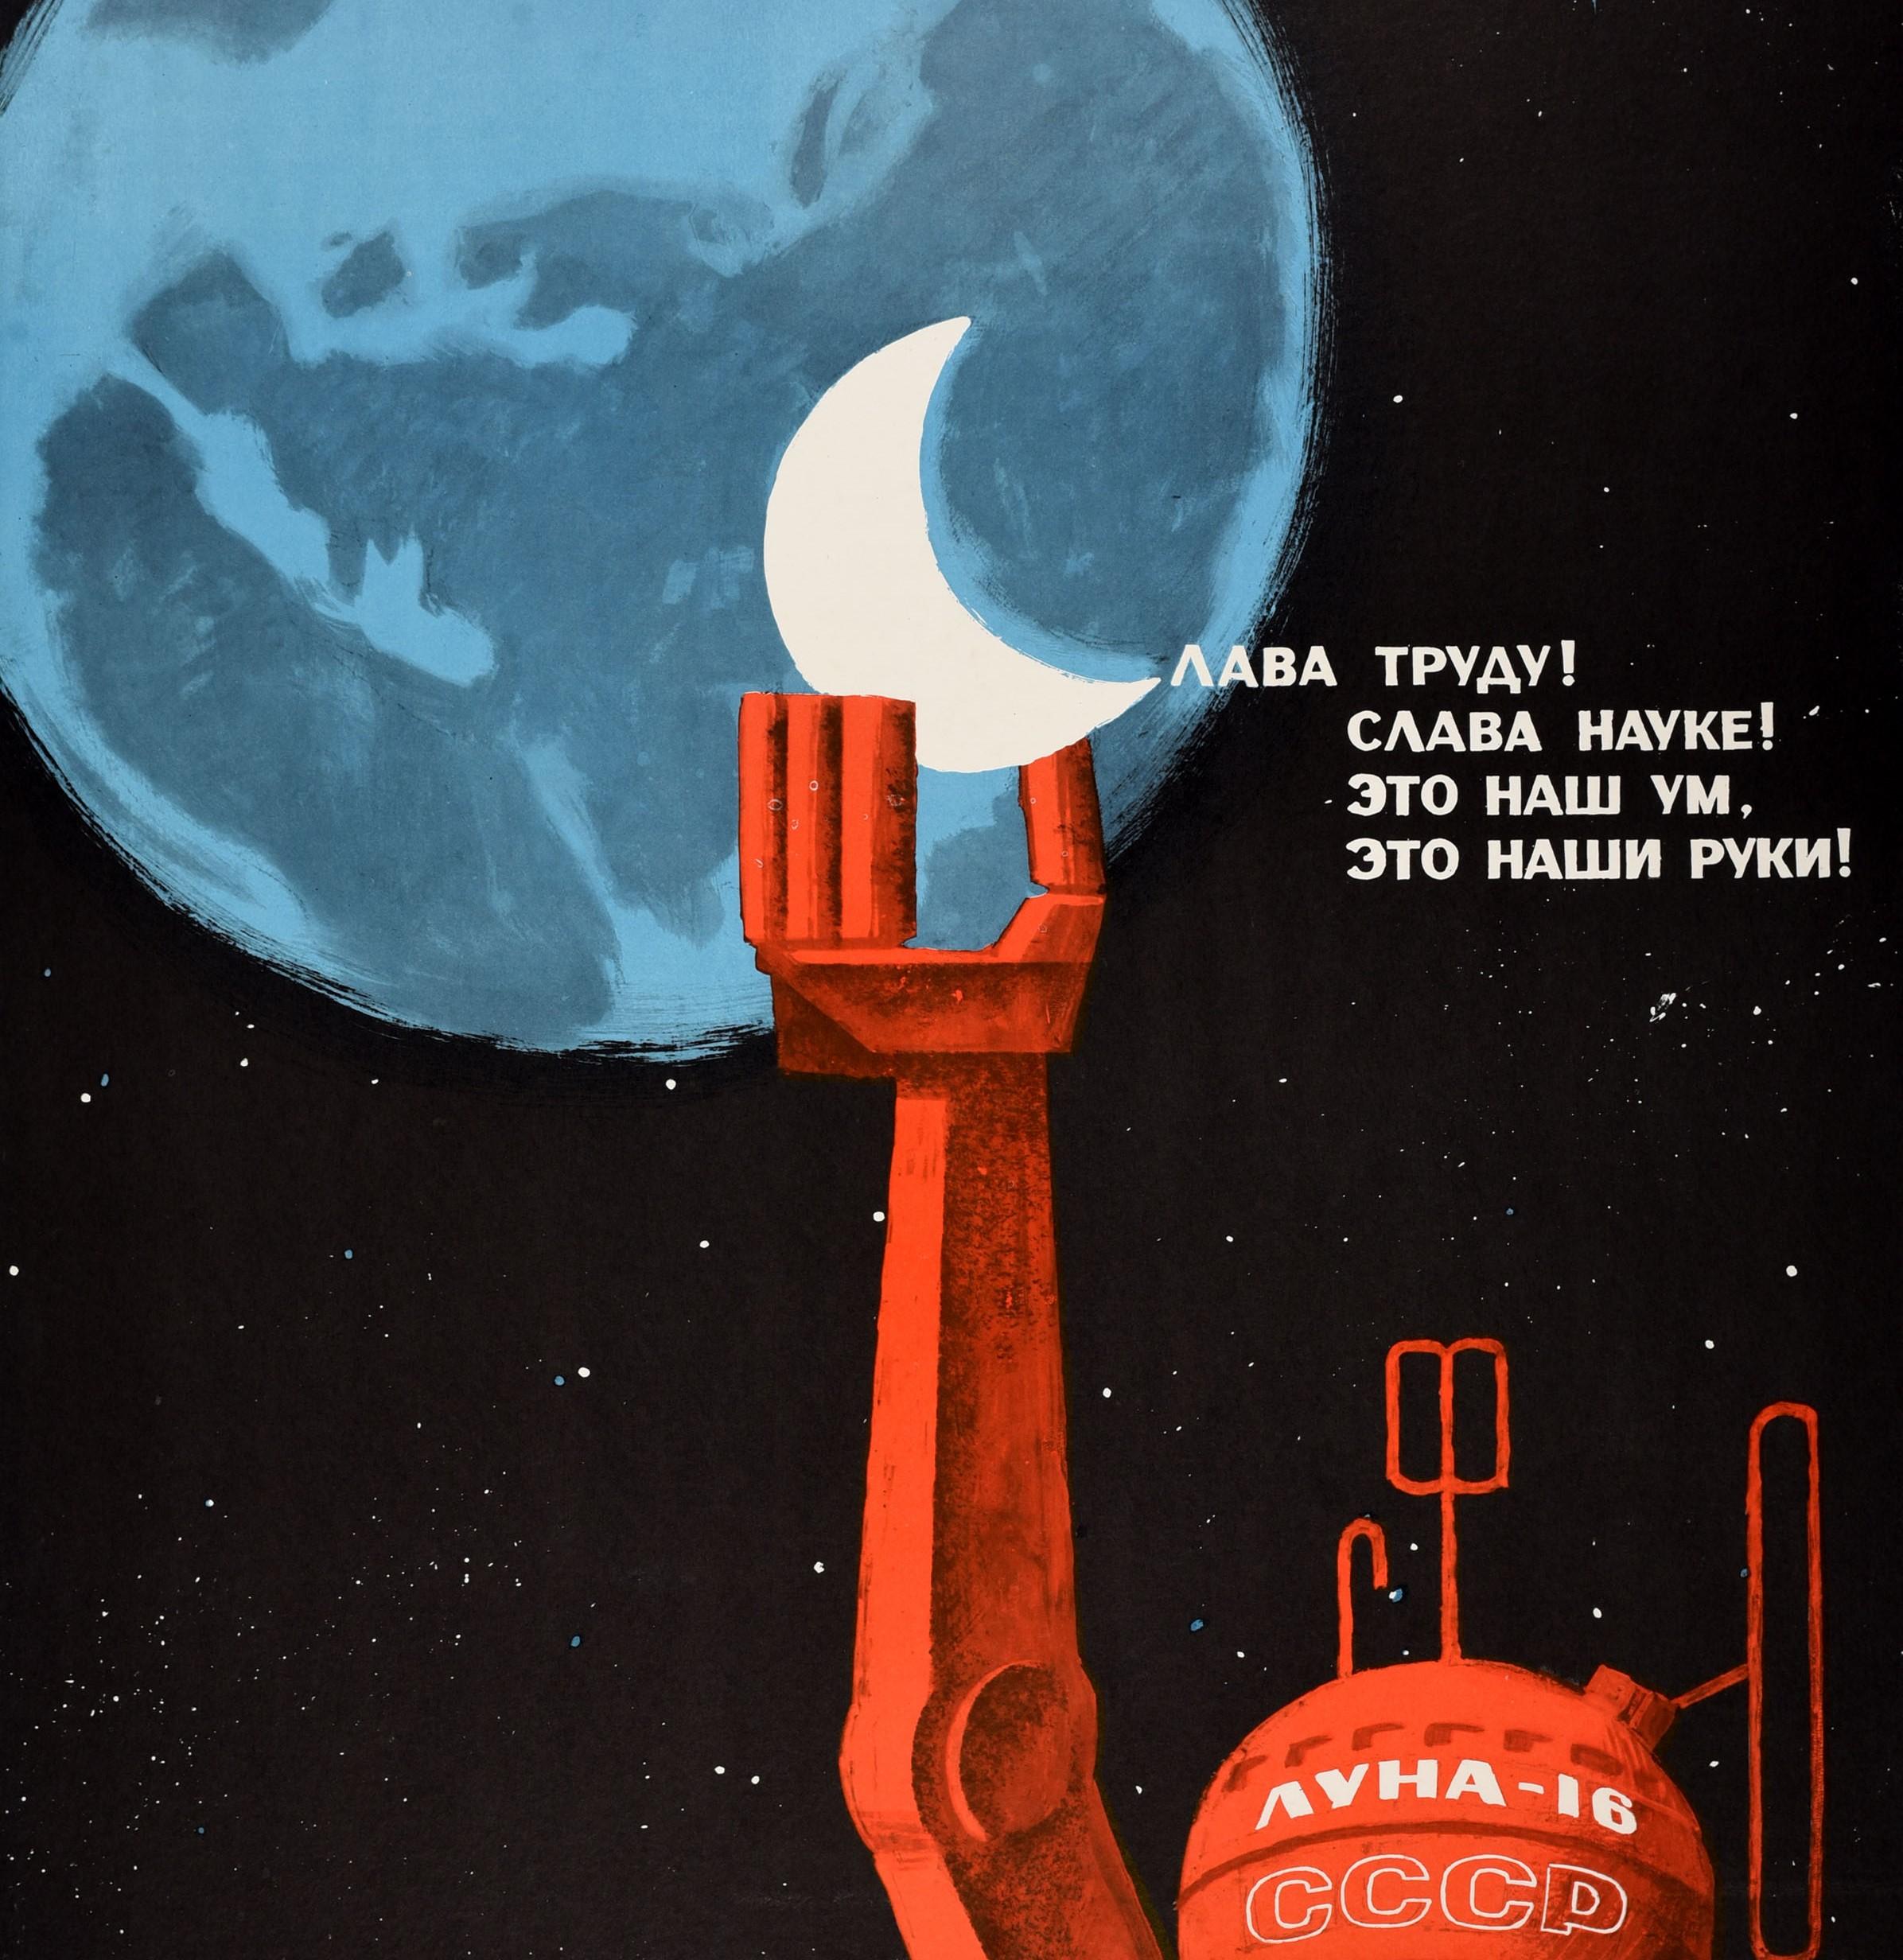 Original vintage Soviet space race era propaganda poster - Glory to Labour! Glory To Science! This is Our Mind, These are our Hands! / Слава труду! Слава науке! Это наш ум, это наши руки! - featuring a red spacecraft with a robot arm named Luna-16